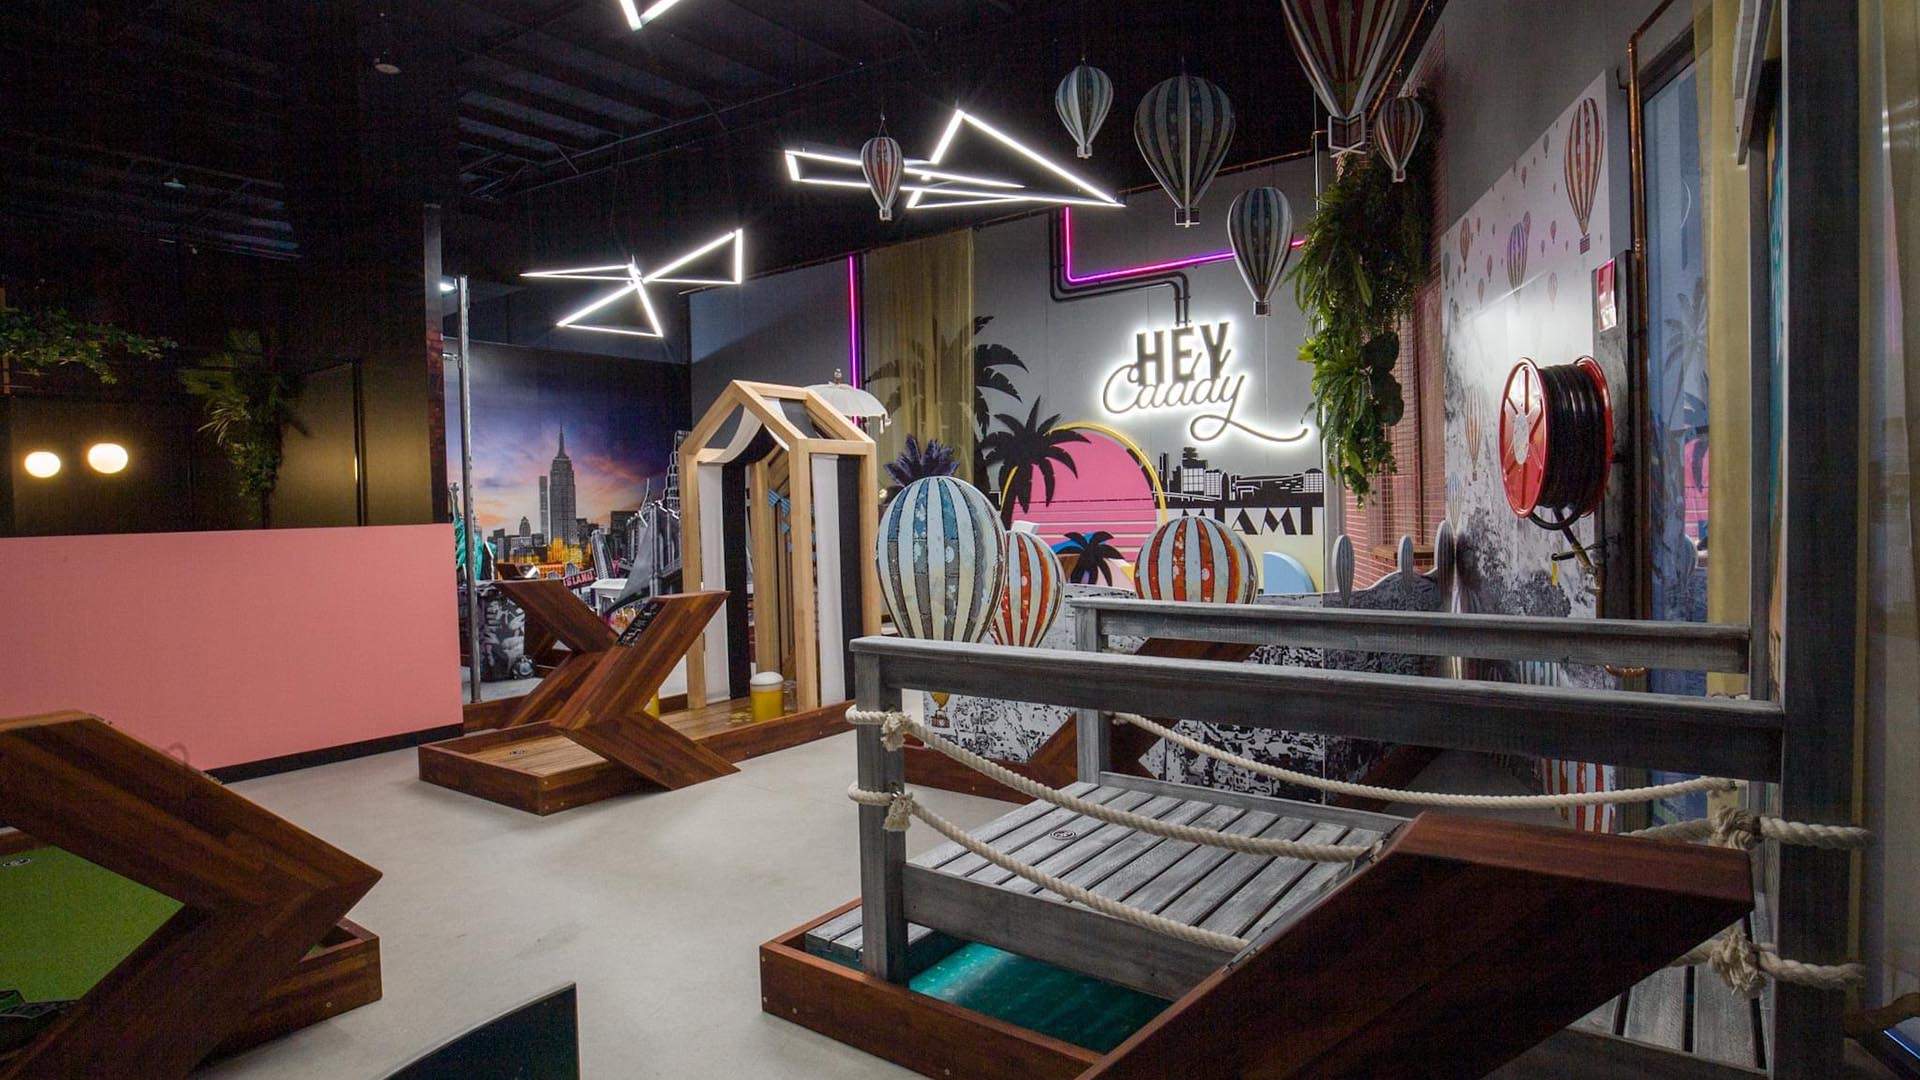 Coming Soon: South Bank Is Getting a 12-Hole Indoor Mini-Golf Course and Golf Simulator with a Bar